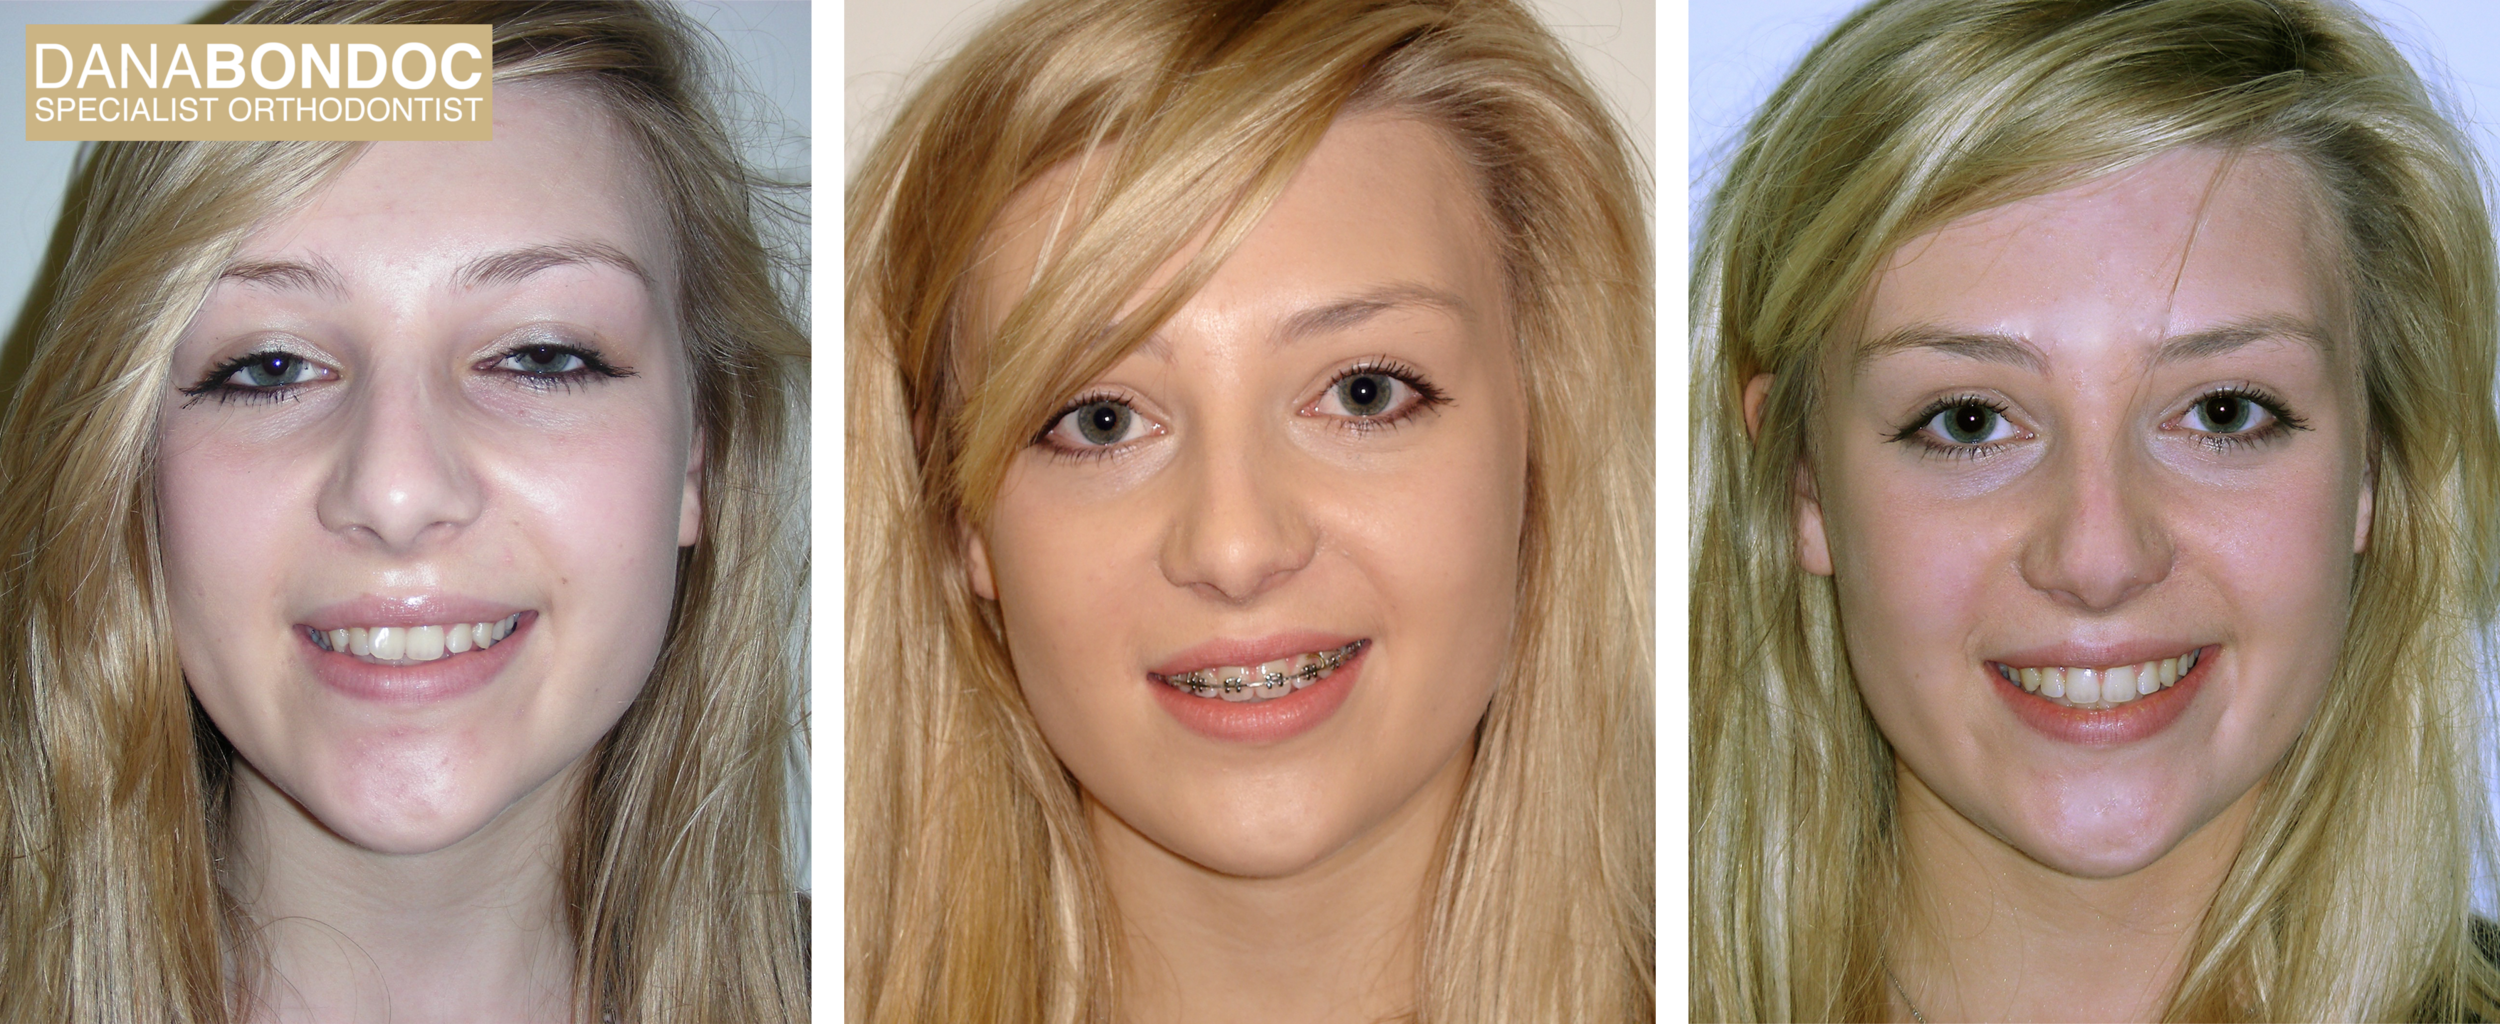 Before treatment, with metal braces on, after treatment photos of a female teenager and written testimonial.